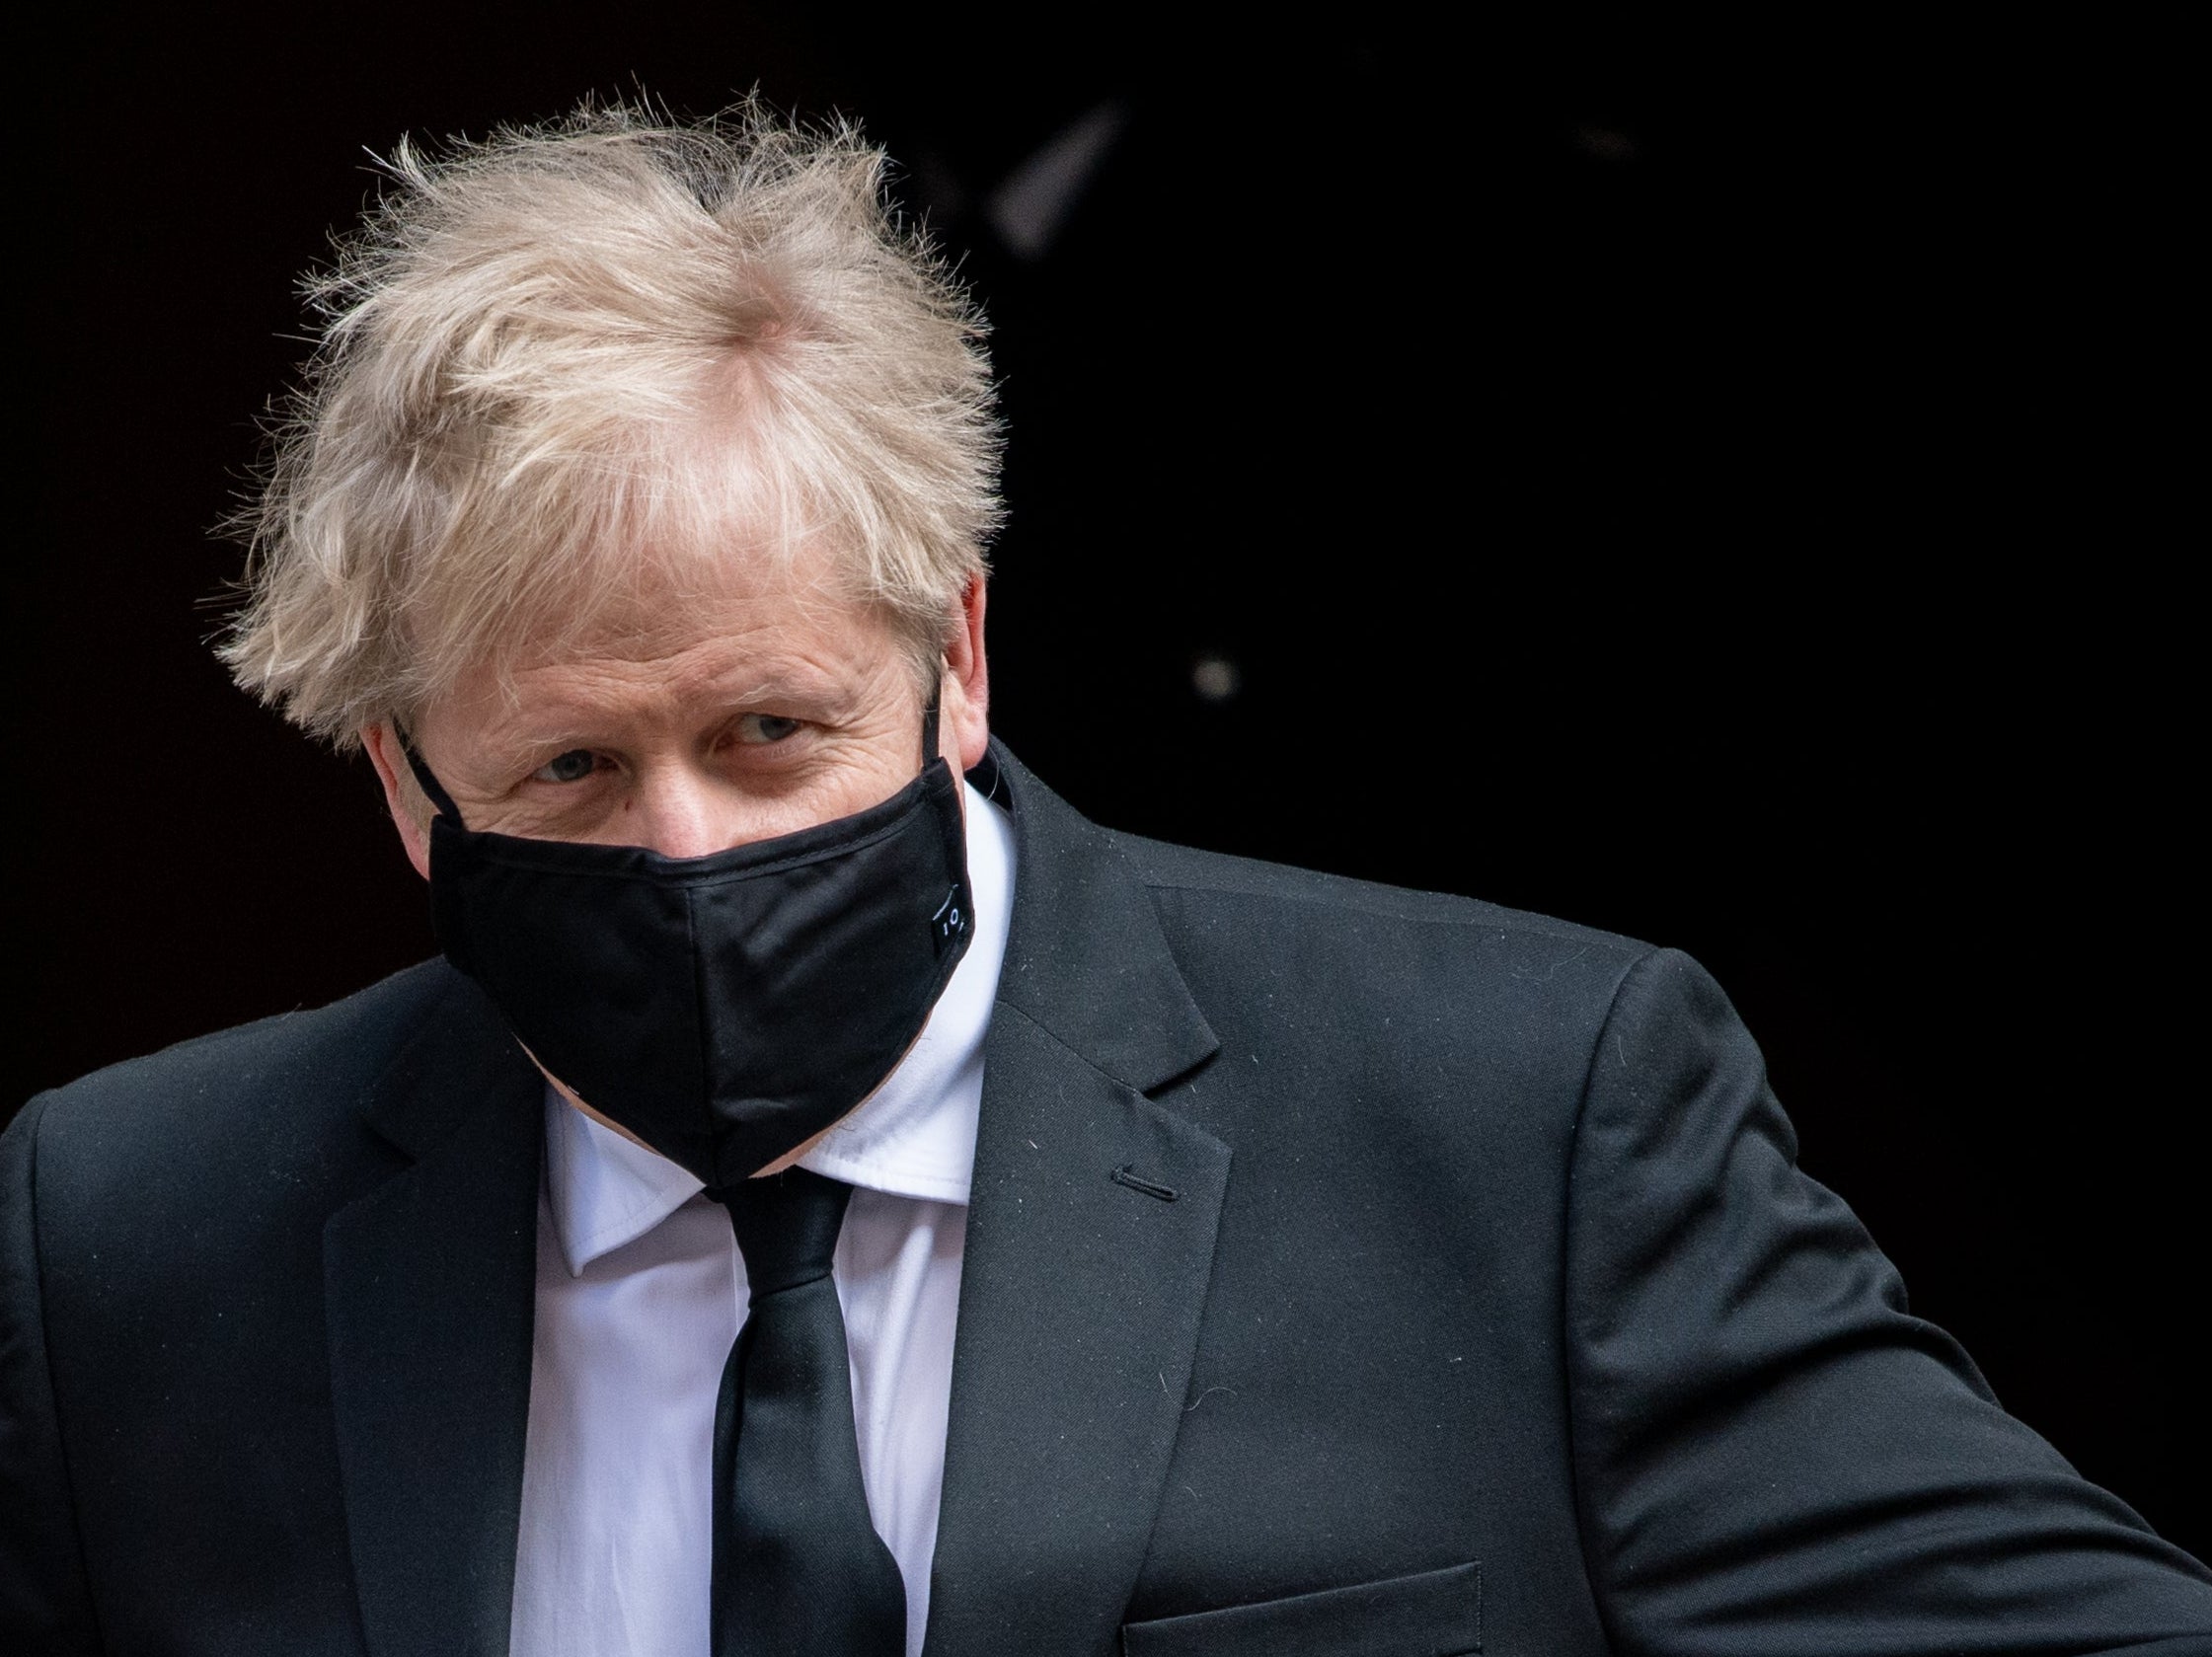 Boris Johnson would be mistaken in revelling in David Cameron’s humiliation too much